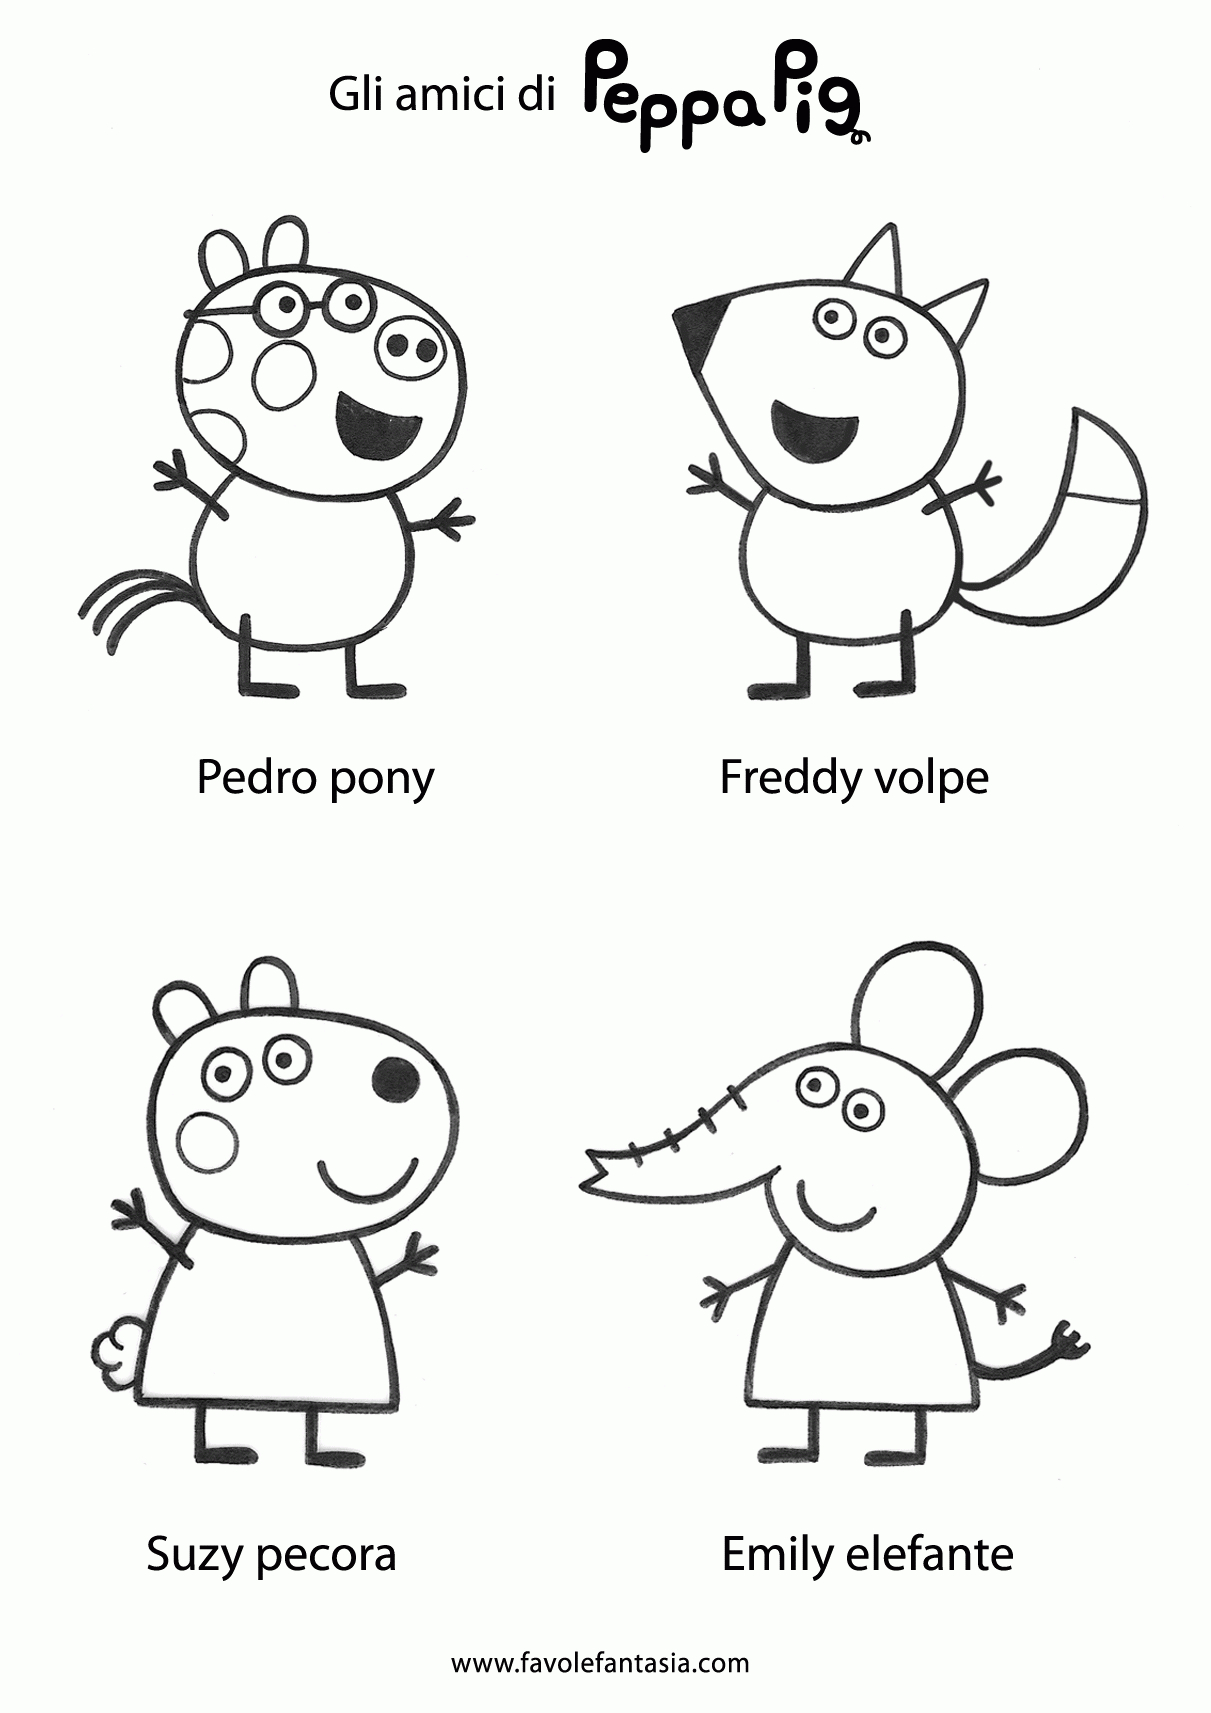 Free Peppa Pig And Friends Coloring Pages Print, Download avec Peppa Pig A Colorier 